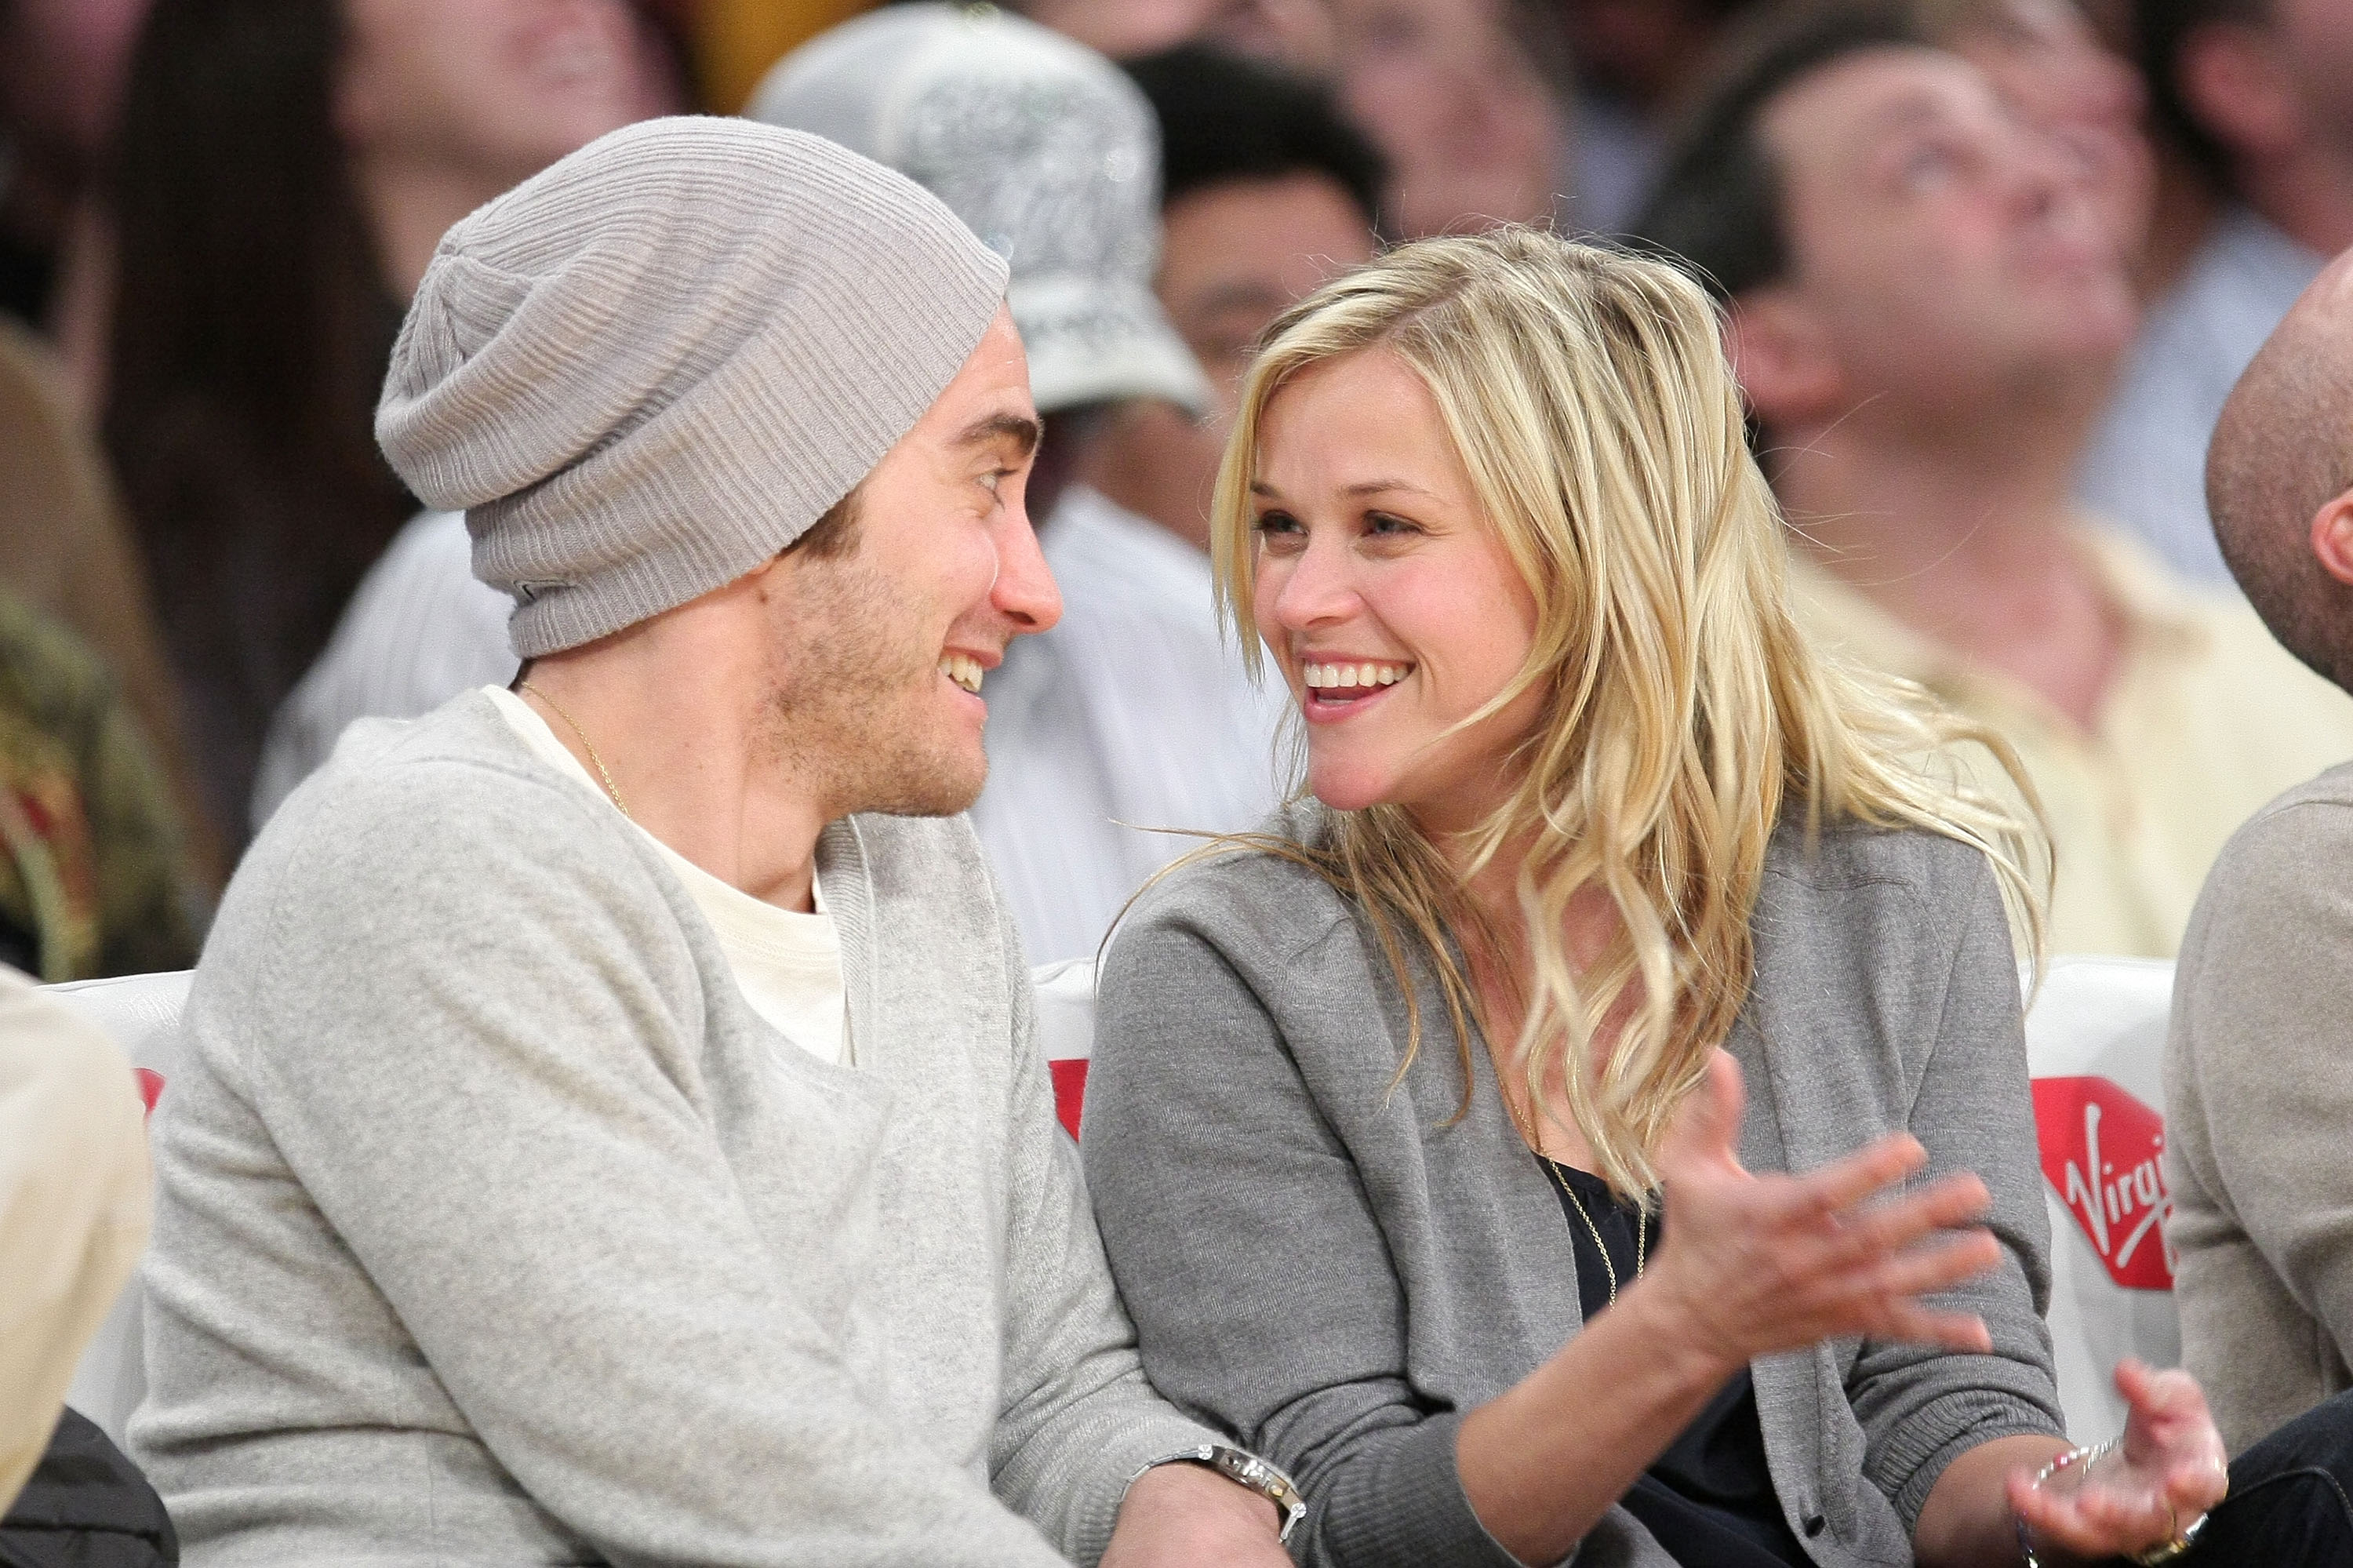 Jake Gyllenhaal and Reese Witherspoon at the Los Angeles Lakers vs Portland Trailblazers game at the Staples Center, on January 4, 2009, in Los Angeles, California | Source: Getty Image